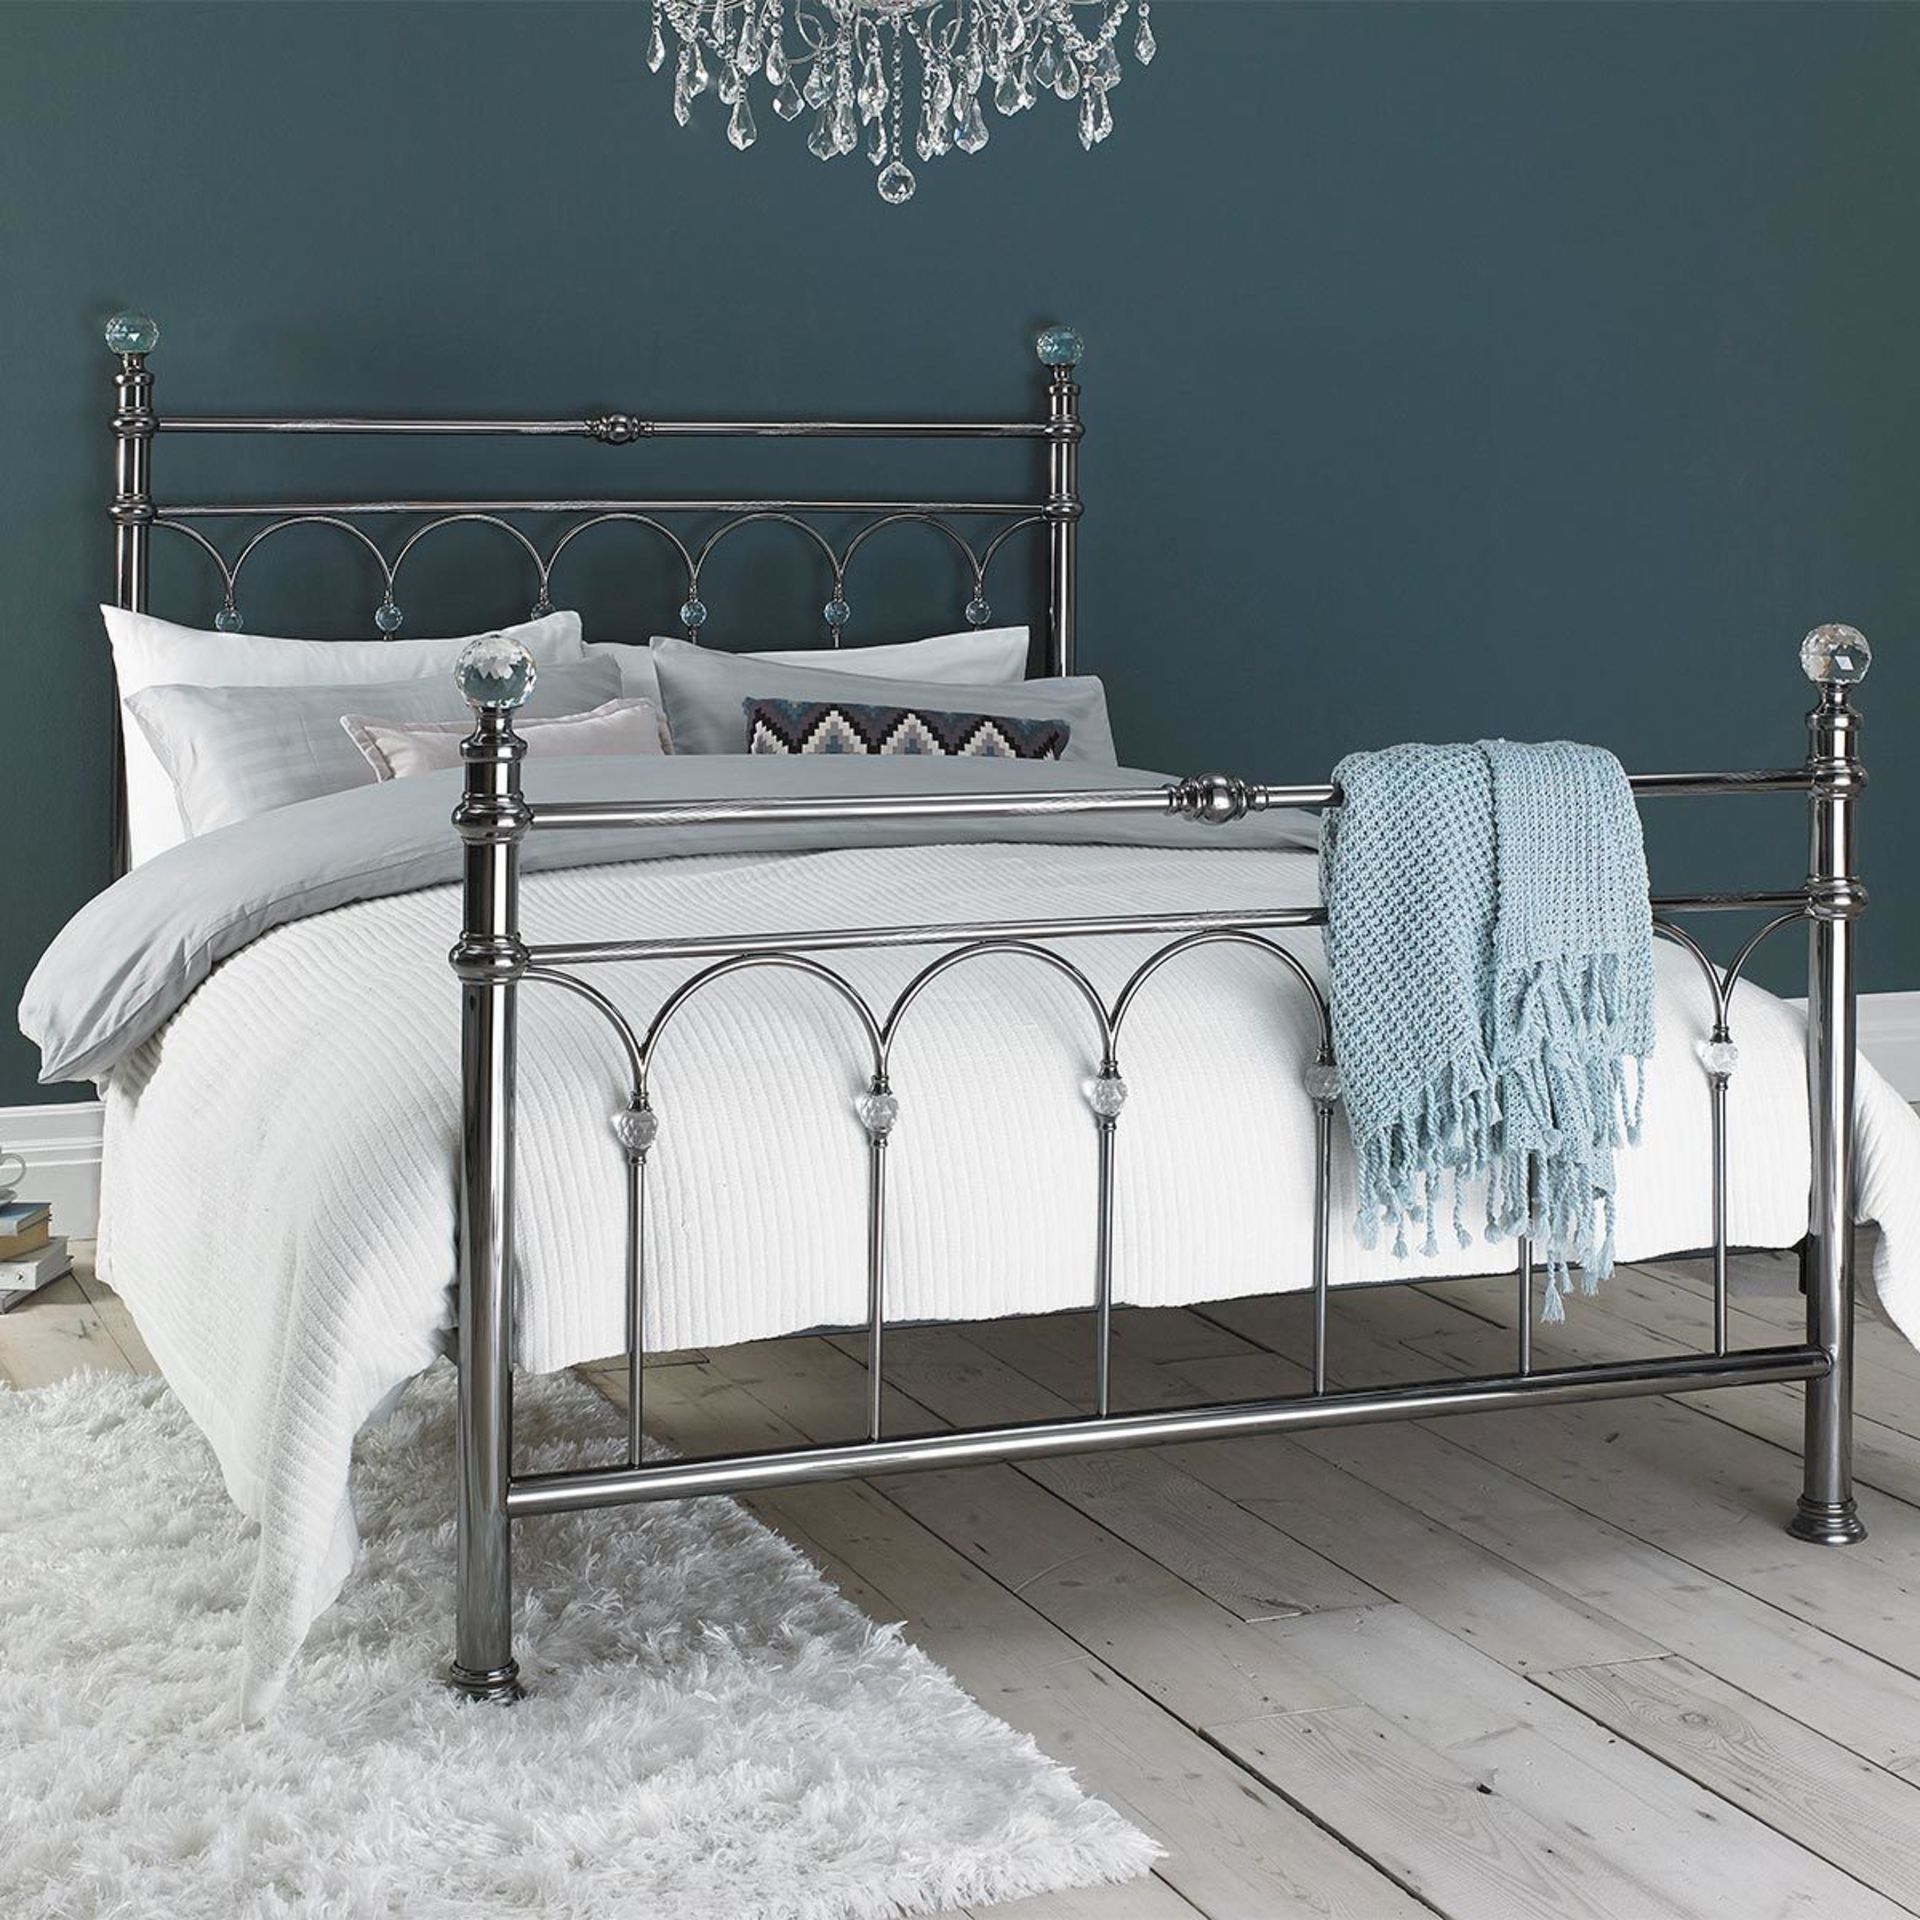 1 BENTLEY DOUBLE CRISTINA ANTIQUE NICKEL FINISH METAL BED FRAME RRP Â£349 (GENERIC IMAGE GUIDE)